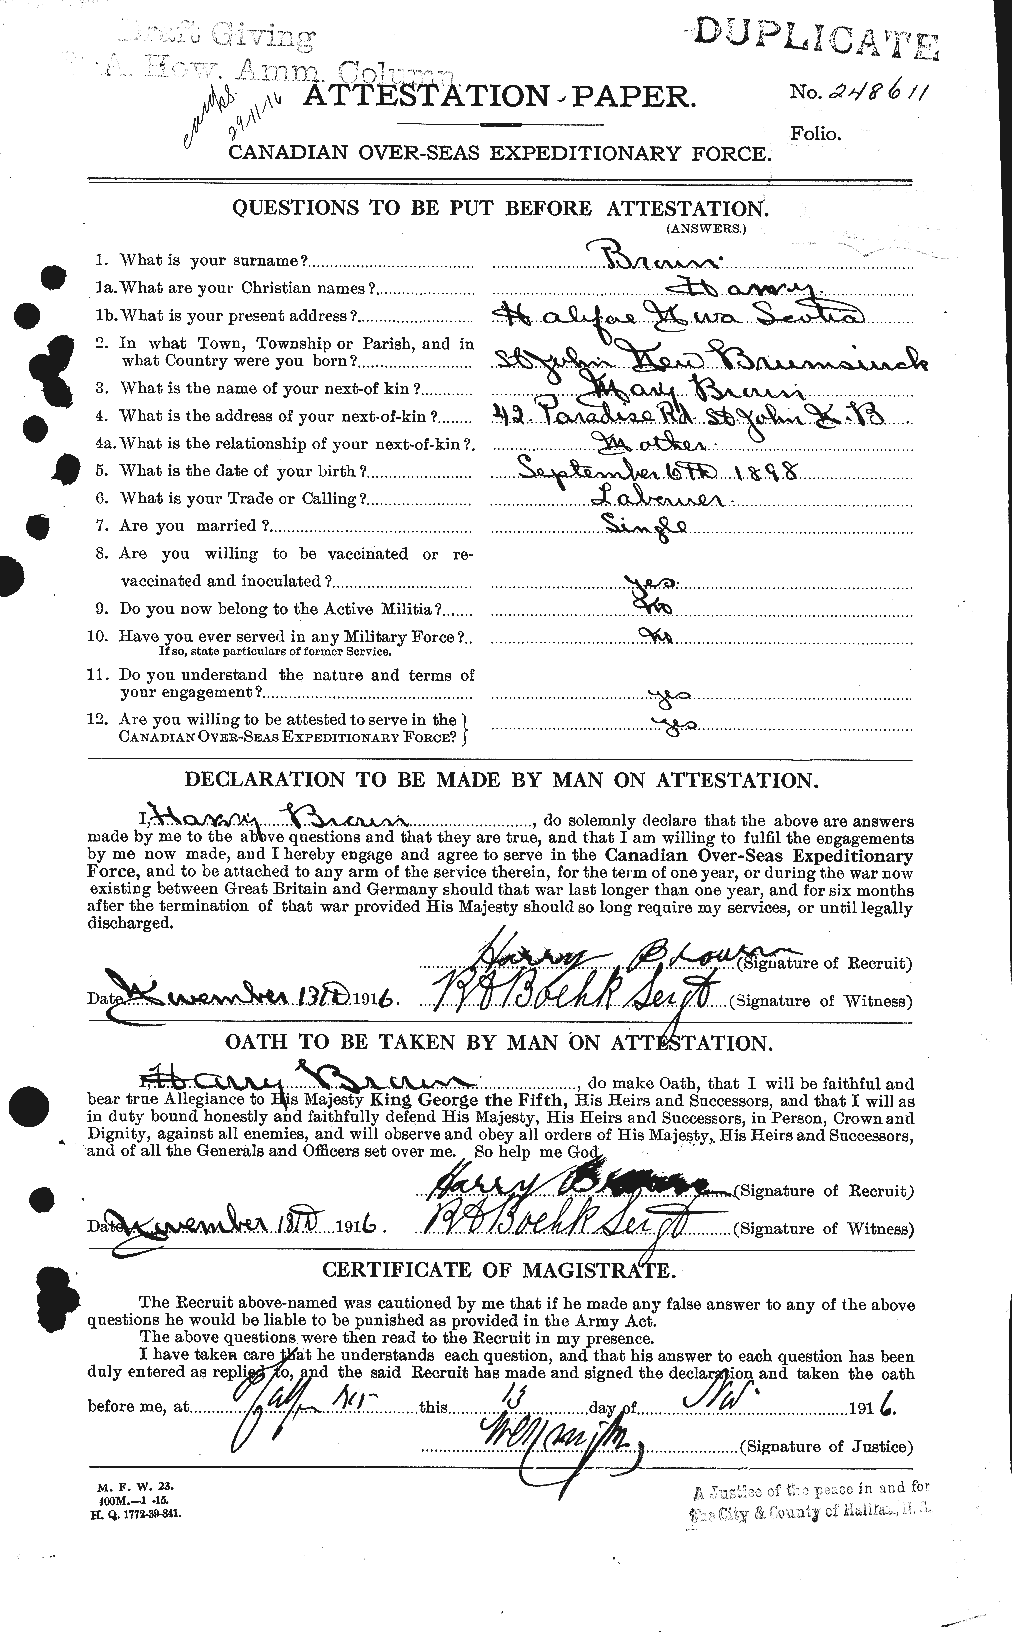 Personnel Records of the First World War - CEF 265394a